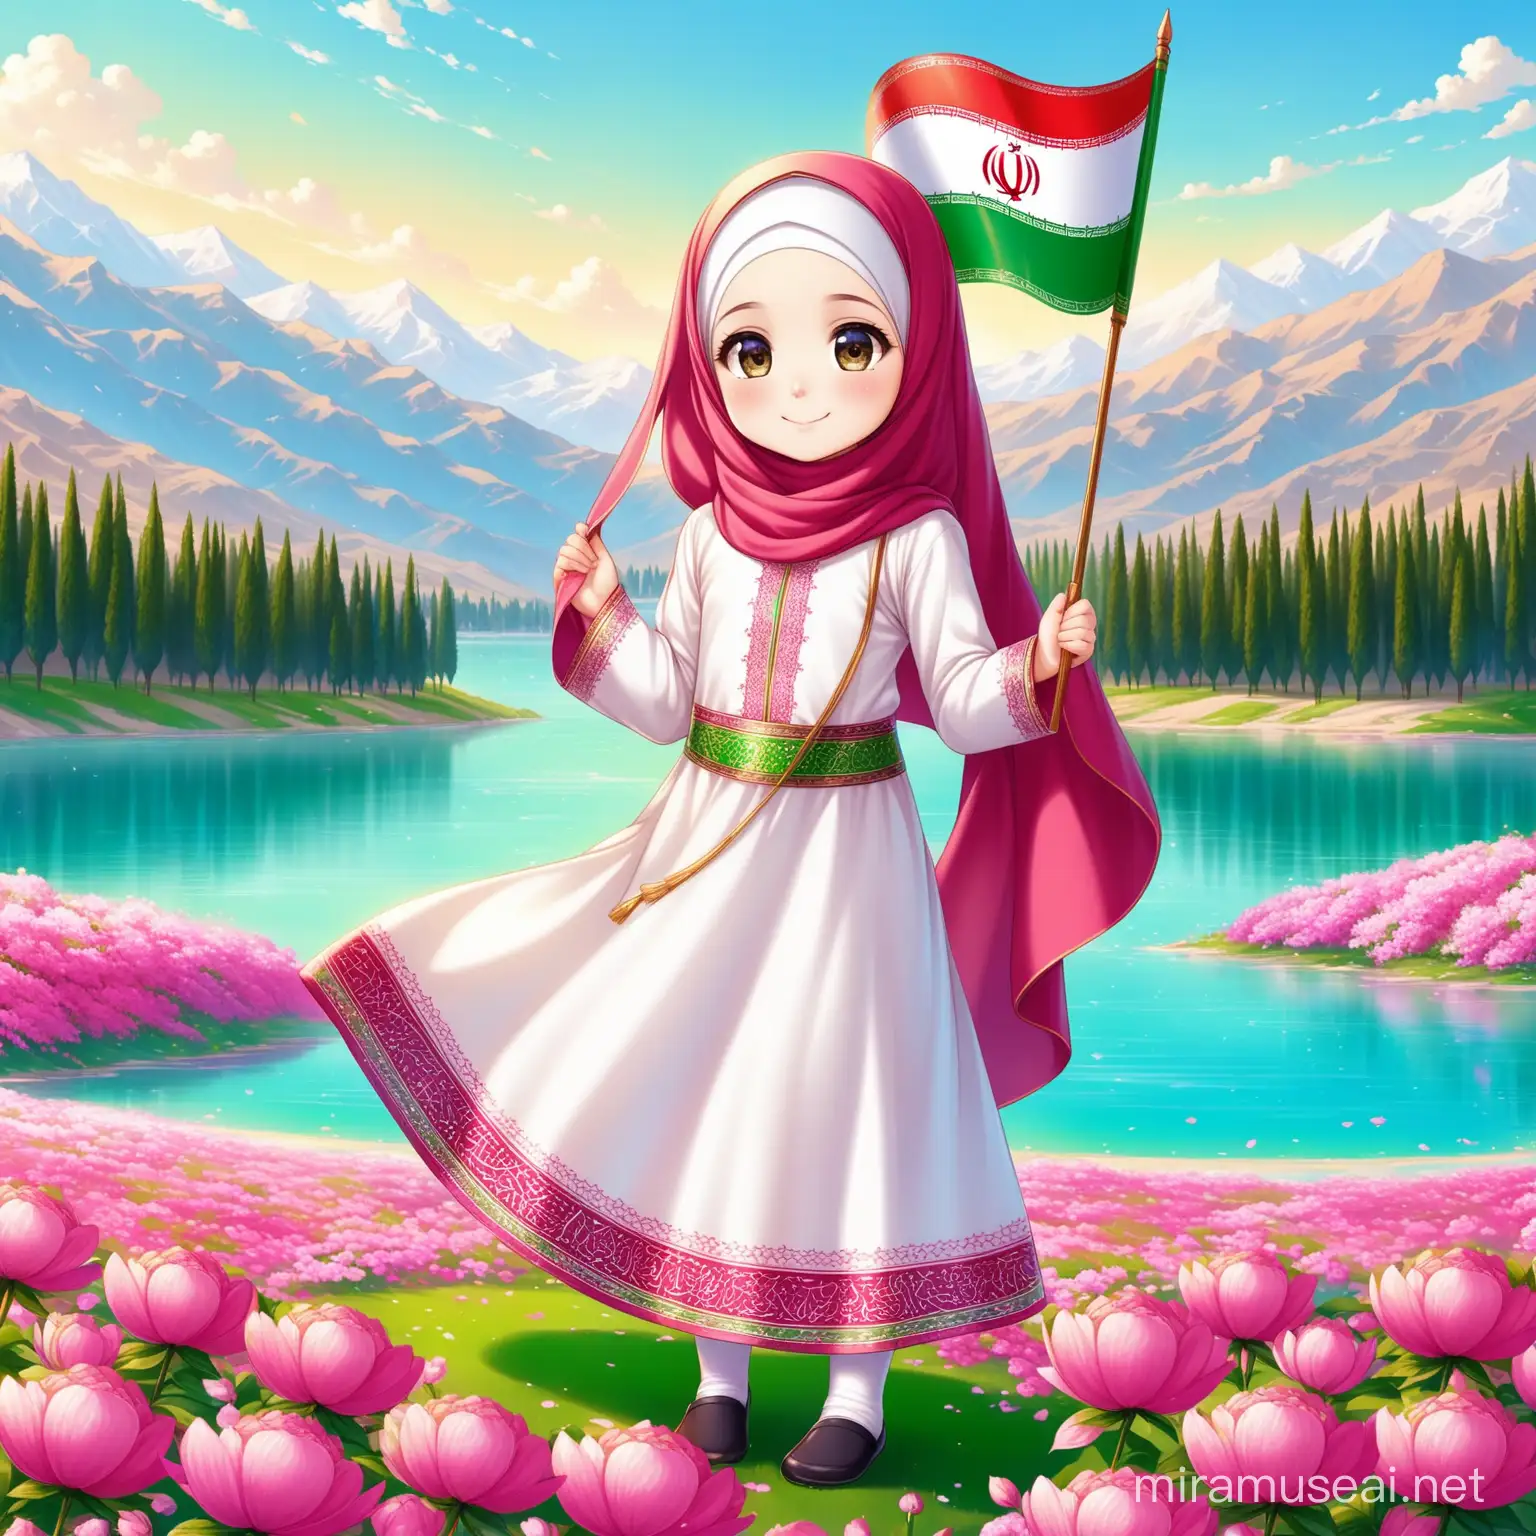 Smiling Persian Girl Holding Iranian Flag Surrounded by Pink Flowers near a Lake